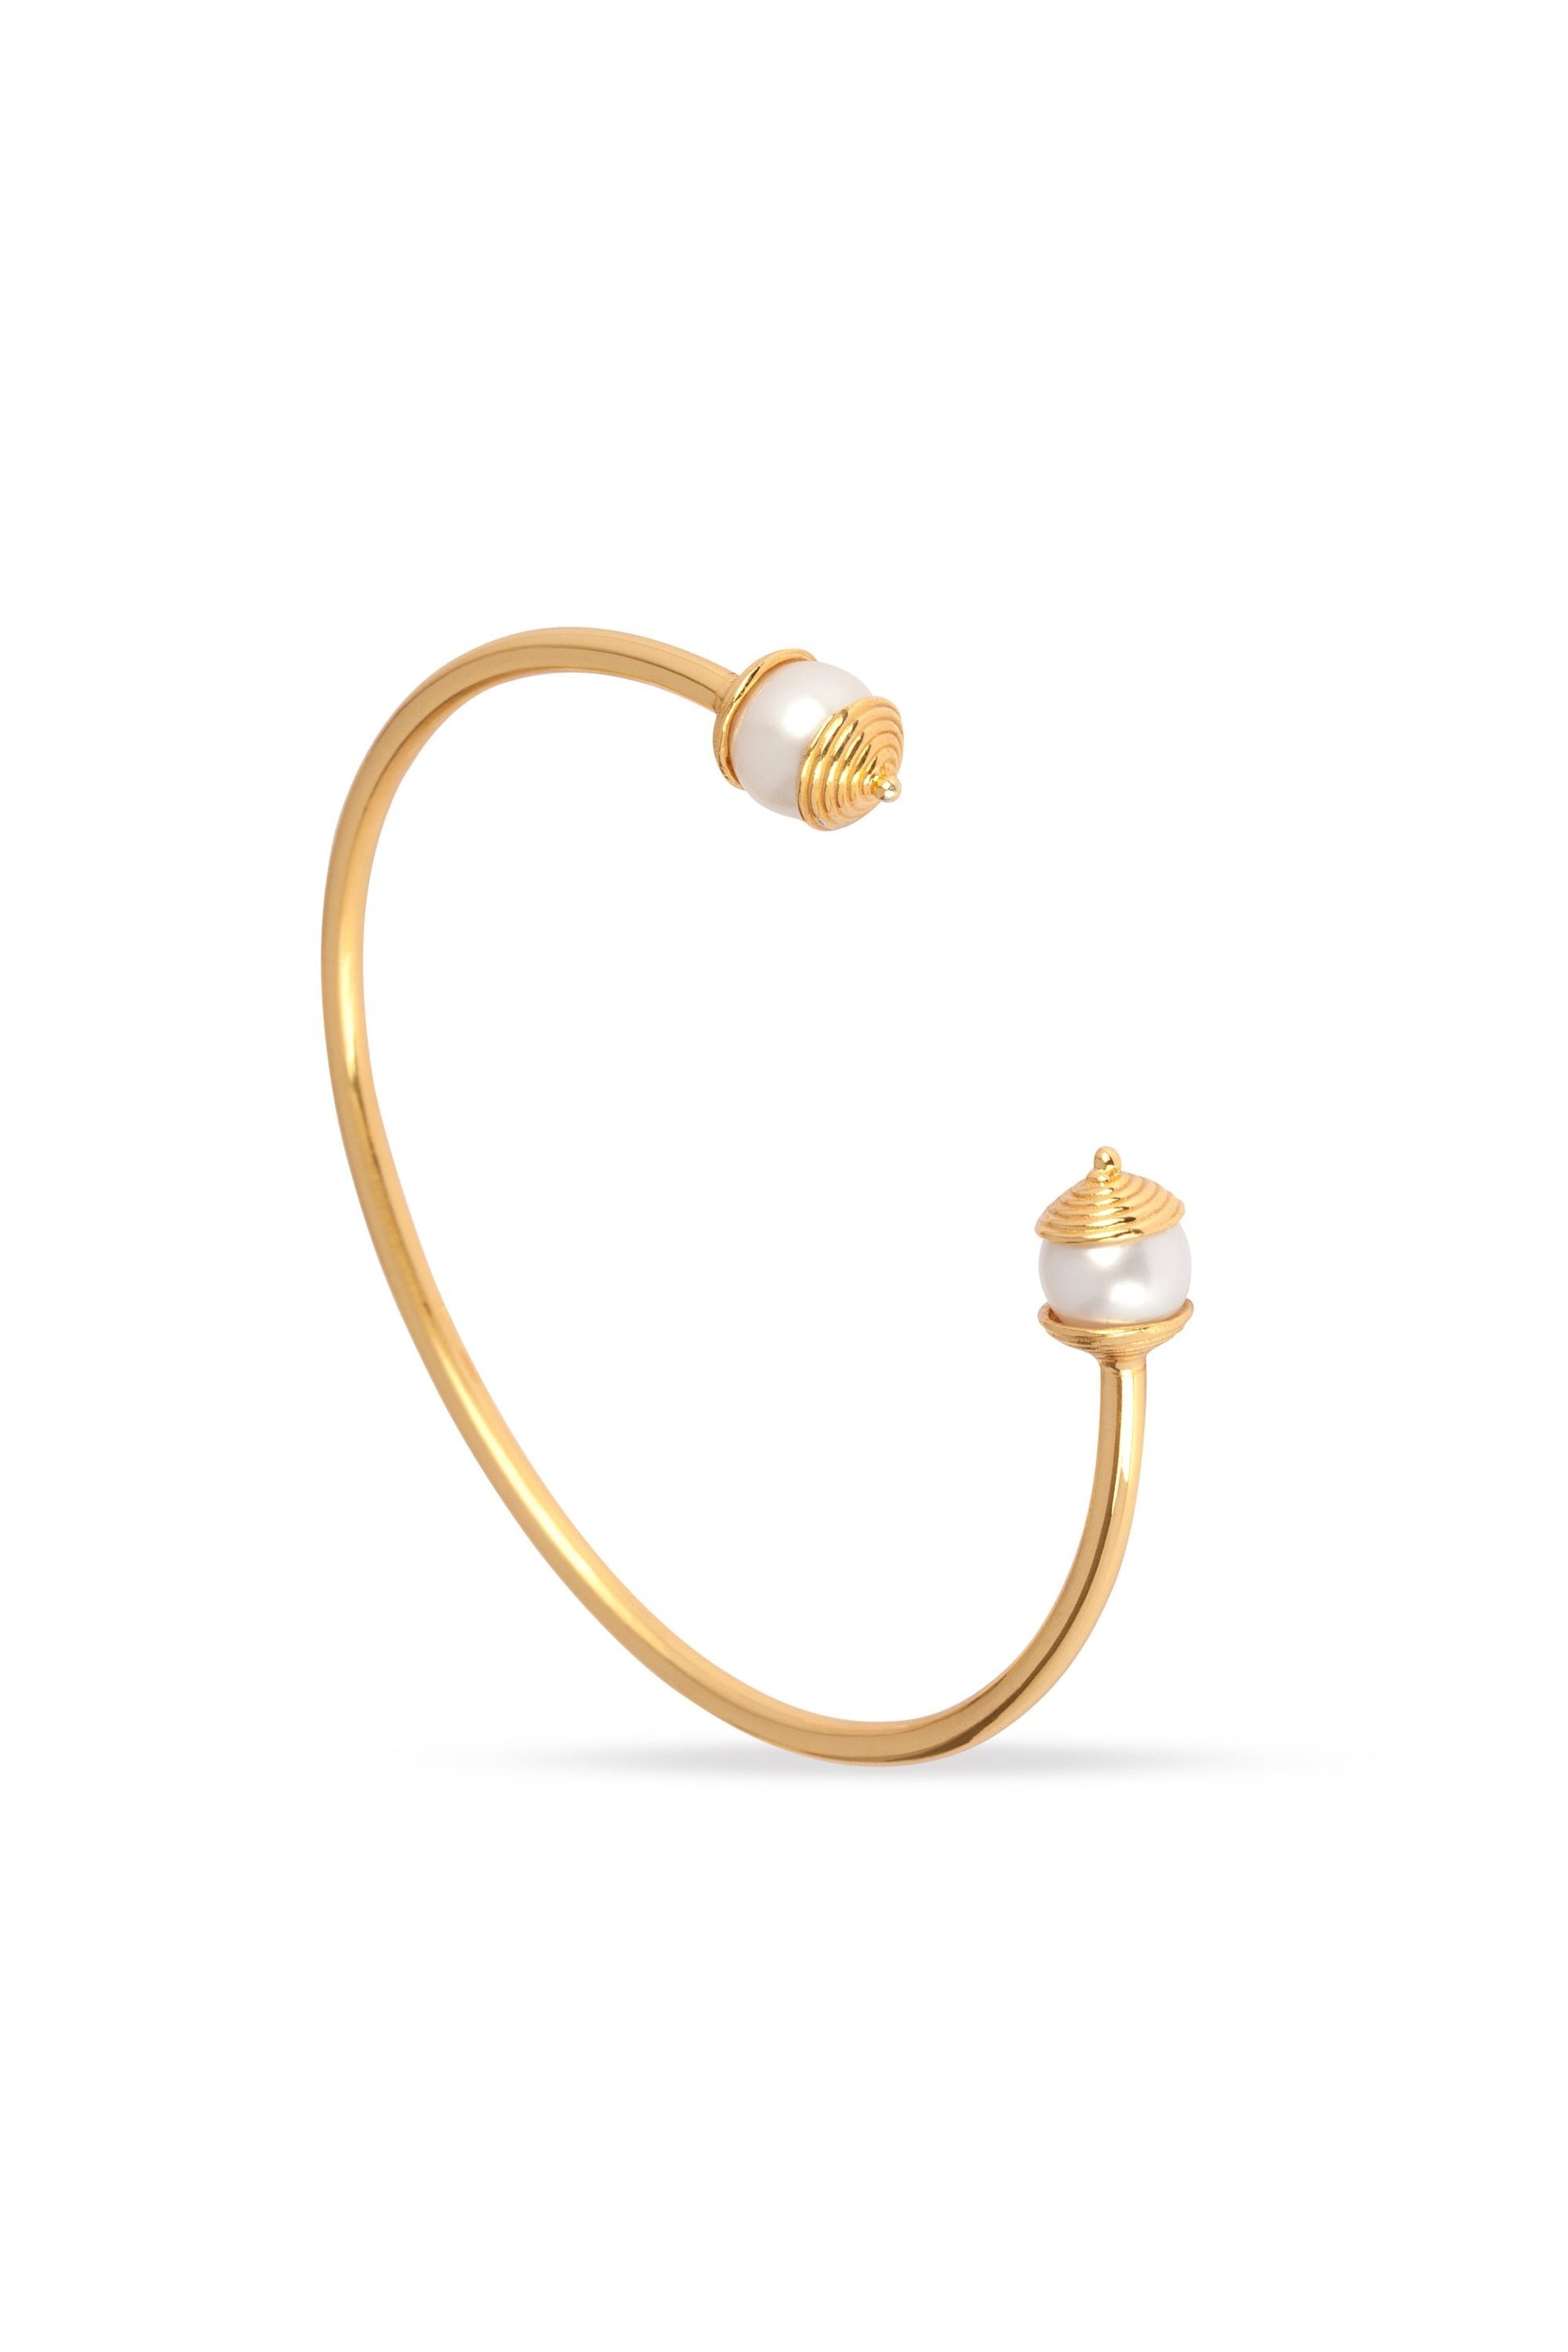 Freshwater Pearl and Gold Bangle for Purity, Harmony & Humility